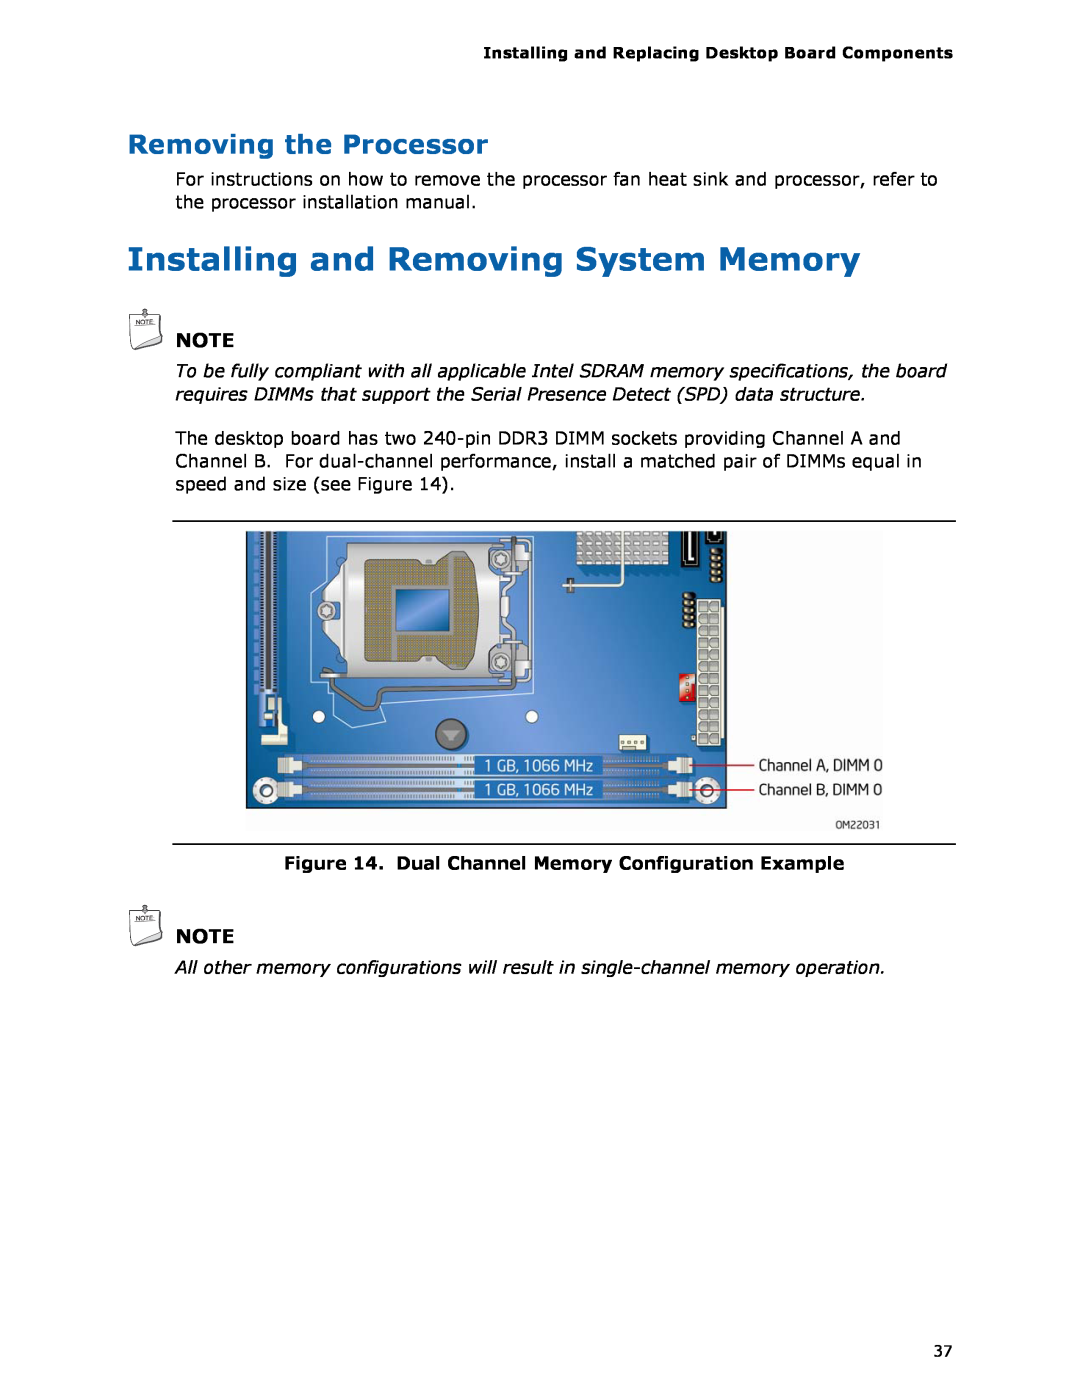 Intel BLKDH57JG Installing and Removing System Memory, Removing the Processor, Dual Channel Memory Configuration Example 